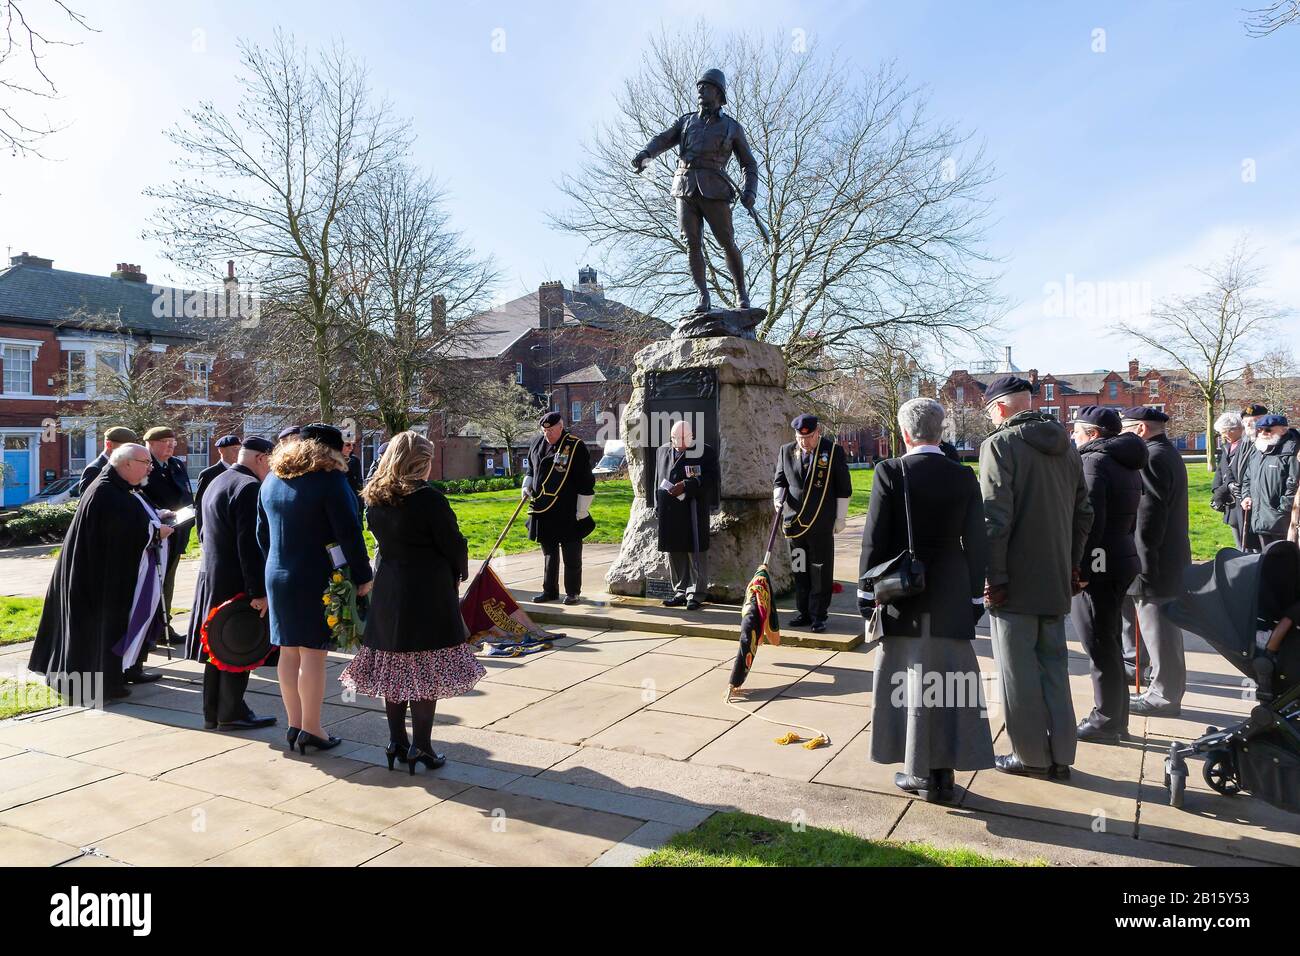 Warrington, UK. 23rd Feb, 2020. Gathering and service at the bronze portrait statue in Queen's Garden, Palmyra Square, Warrington Town centre is of Lt Colonel W McCarthy O'Leary of the South Lancashire Regiment. The siege of Ladysmith where the Boers and the Tugela Heights had to be taken. It was Pieter's Hill in the Tugela Heights when Lt Col McCarthy O'Leary led the charge Credit: John Hopkins/Alamy Live News Stock Photo